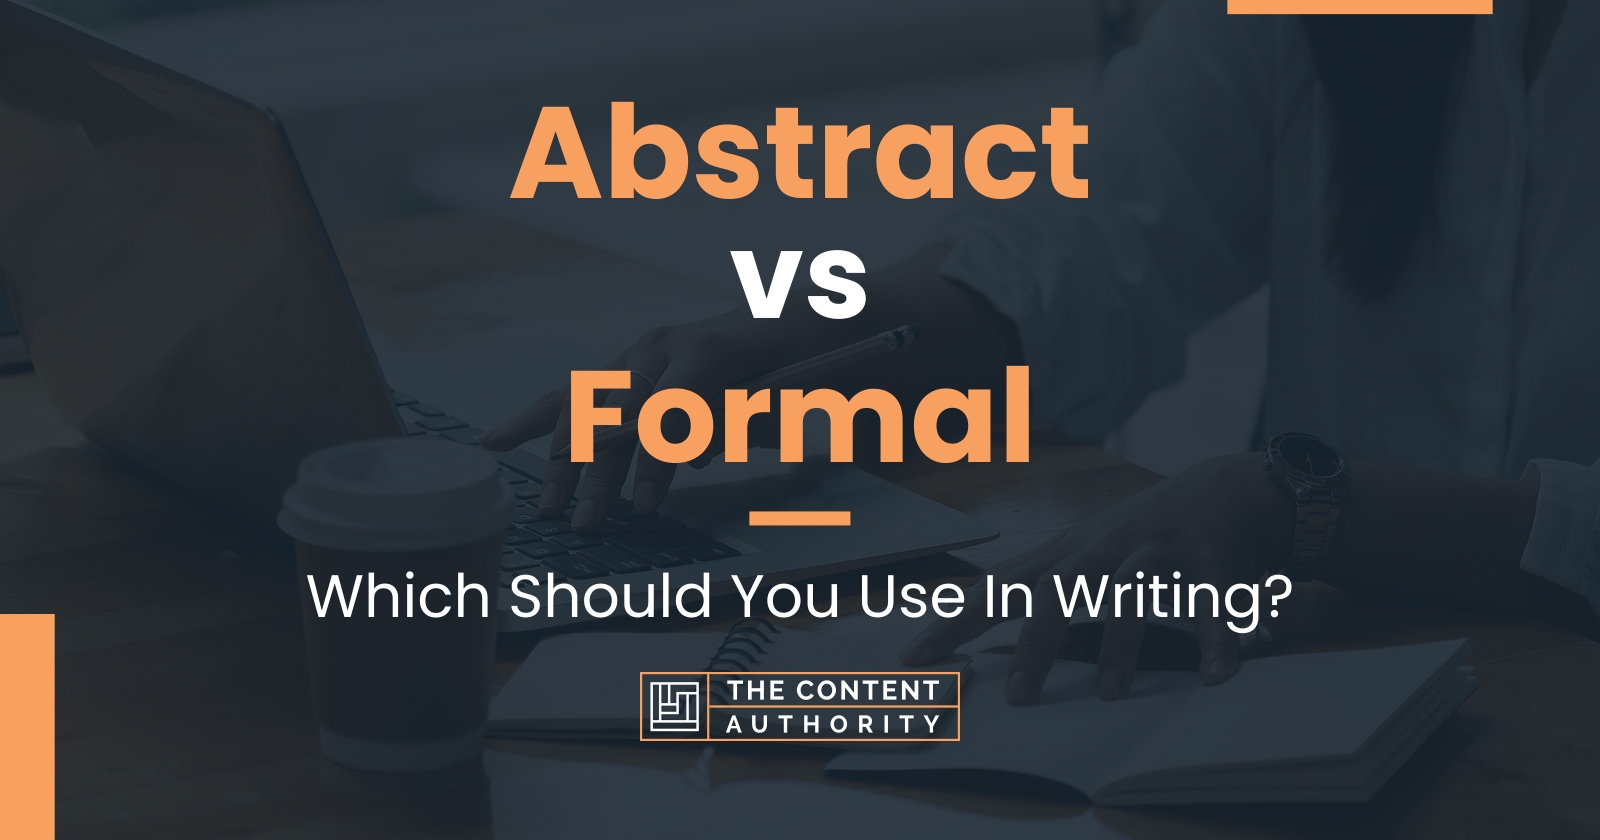 Abstract vs Formal: Which Should You Use In Writing?